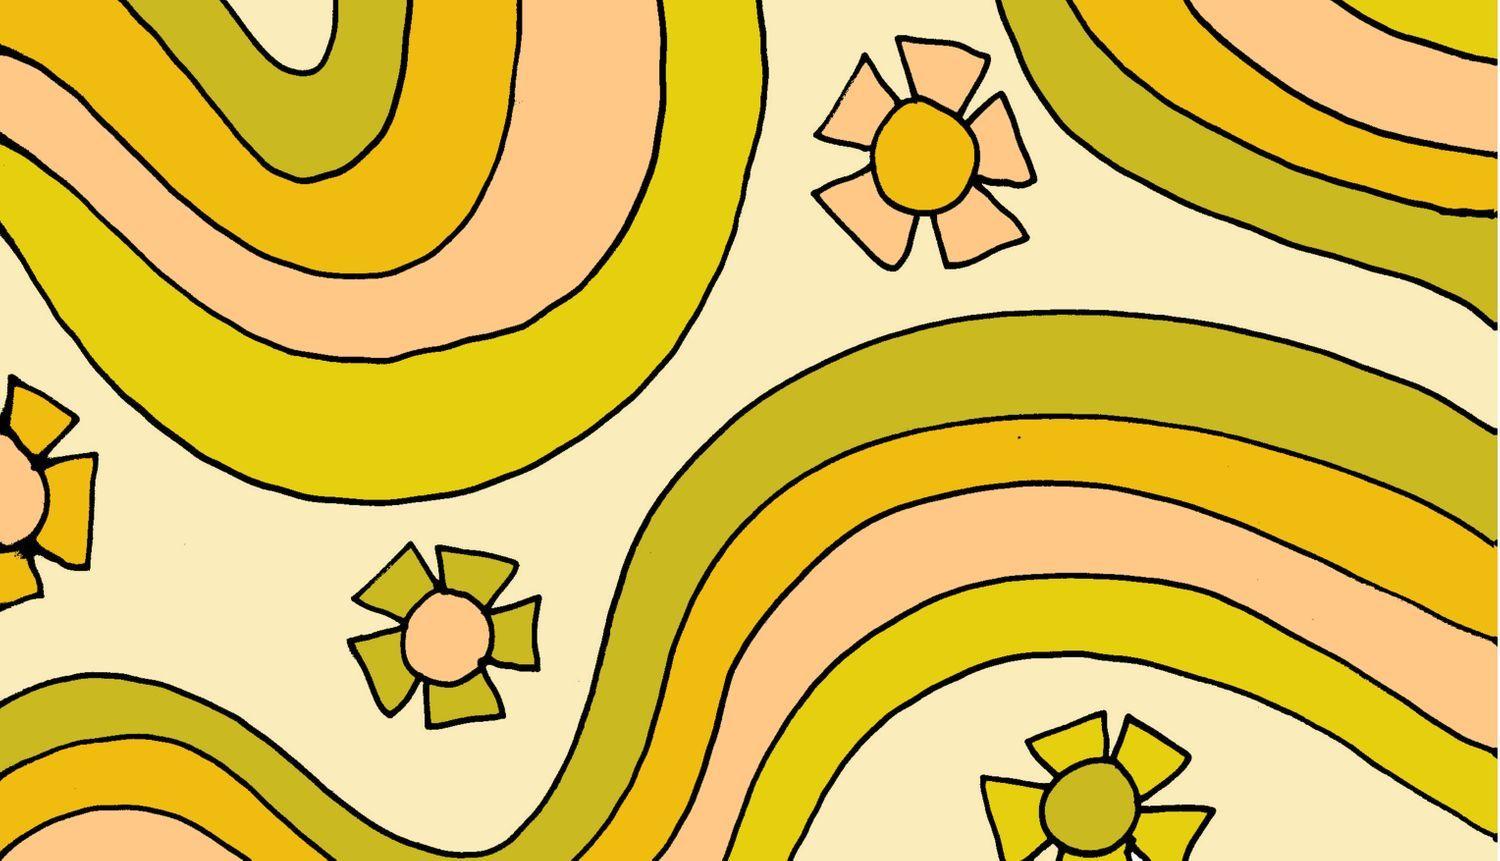 Retro Wallpaper Groovy Vector Images over 6400